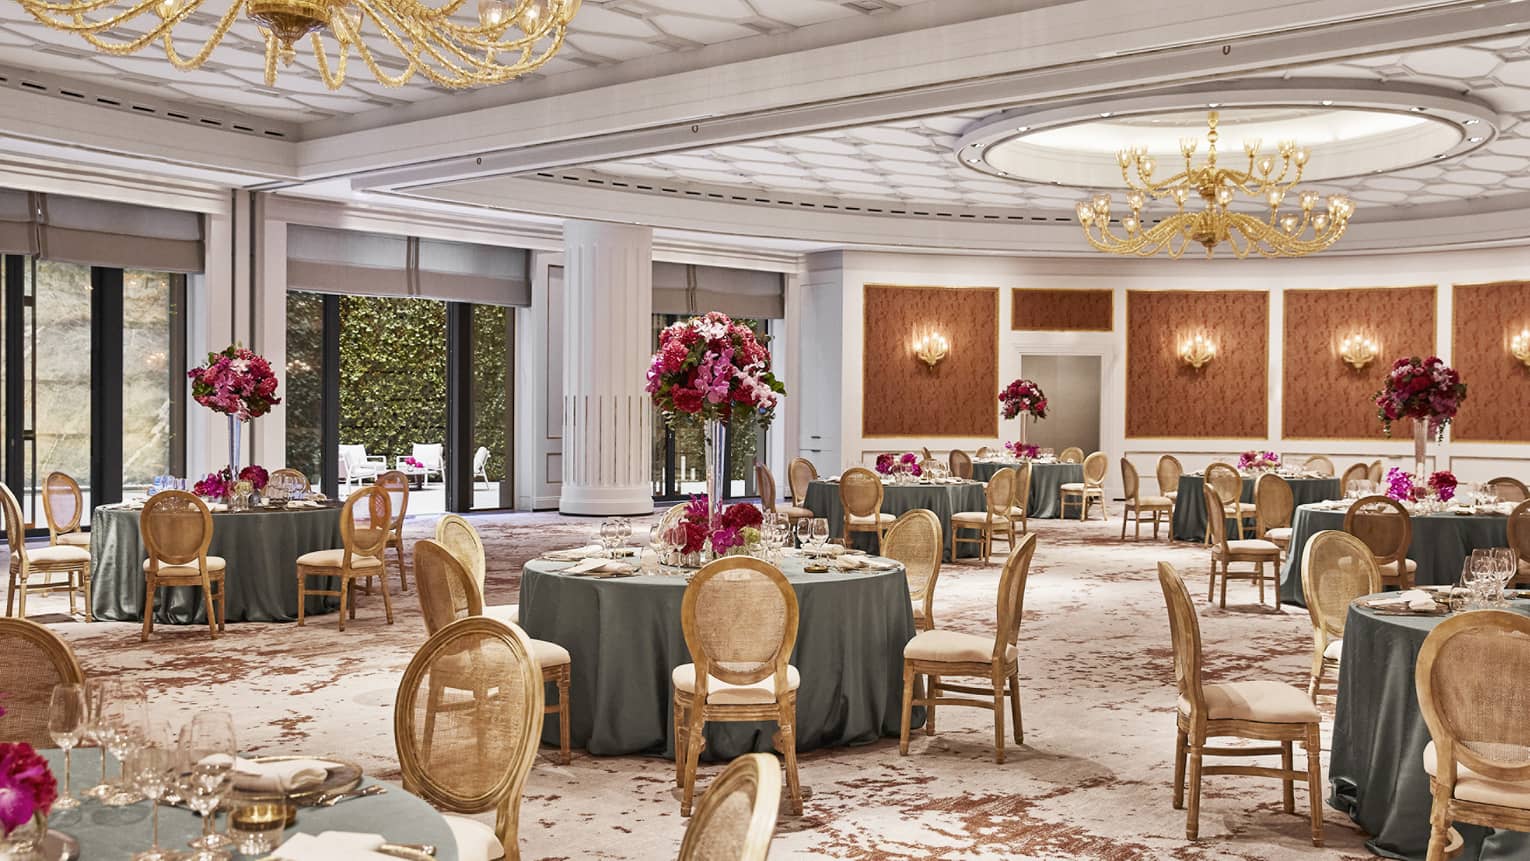 Ballroom with round tables, gold chairs, gold chandeliers, pattern carpeting, wall sconces